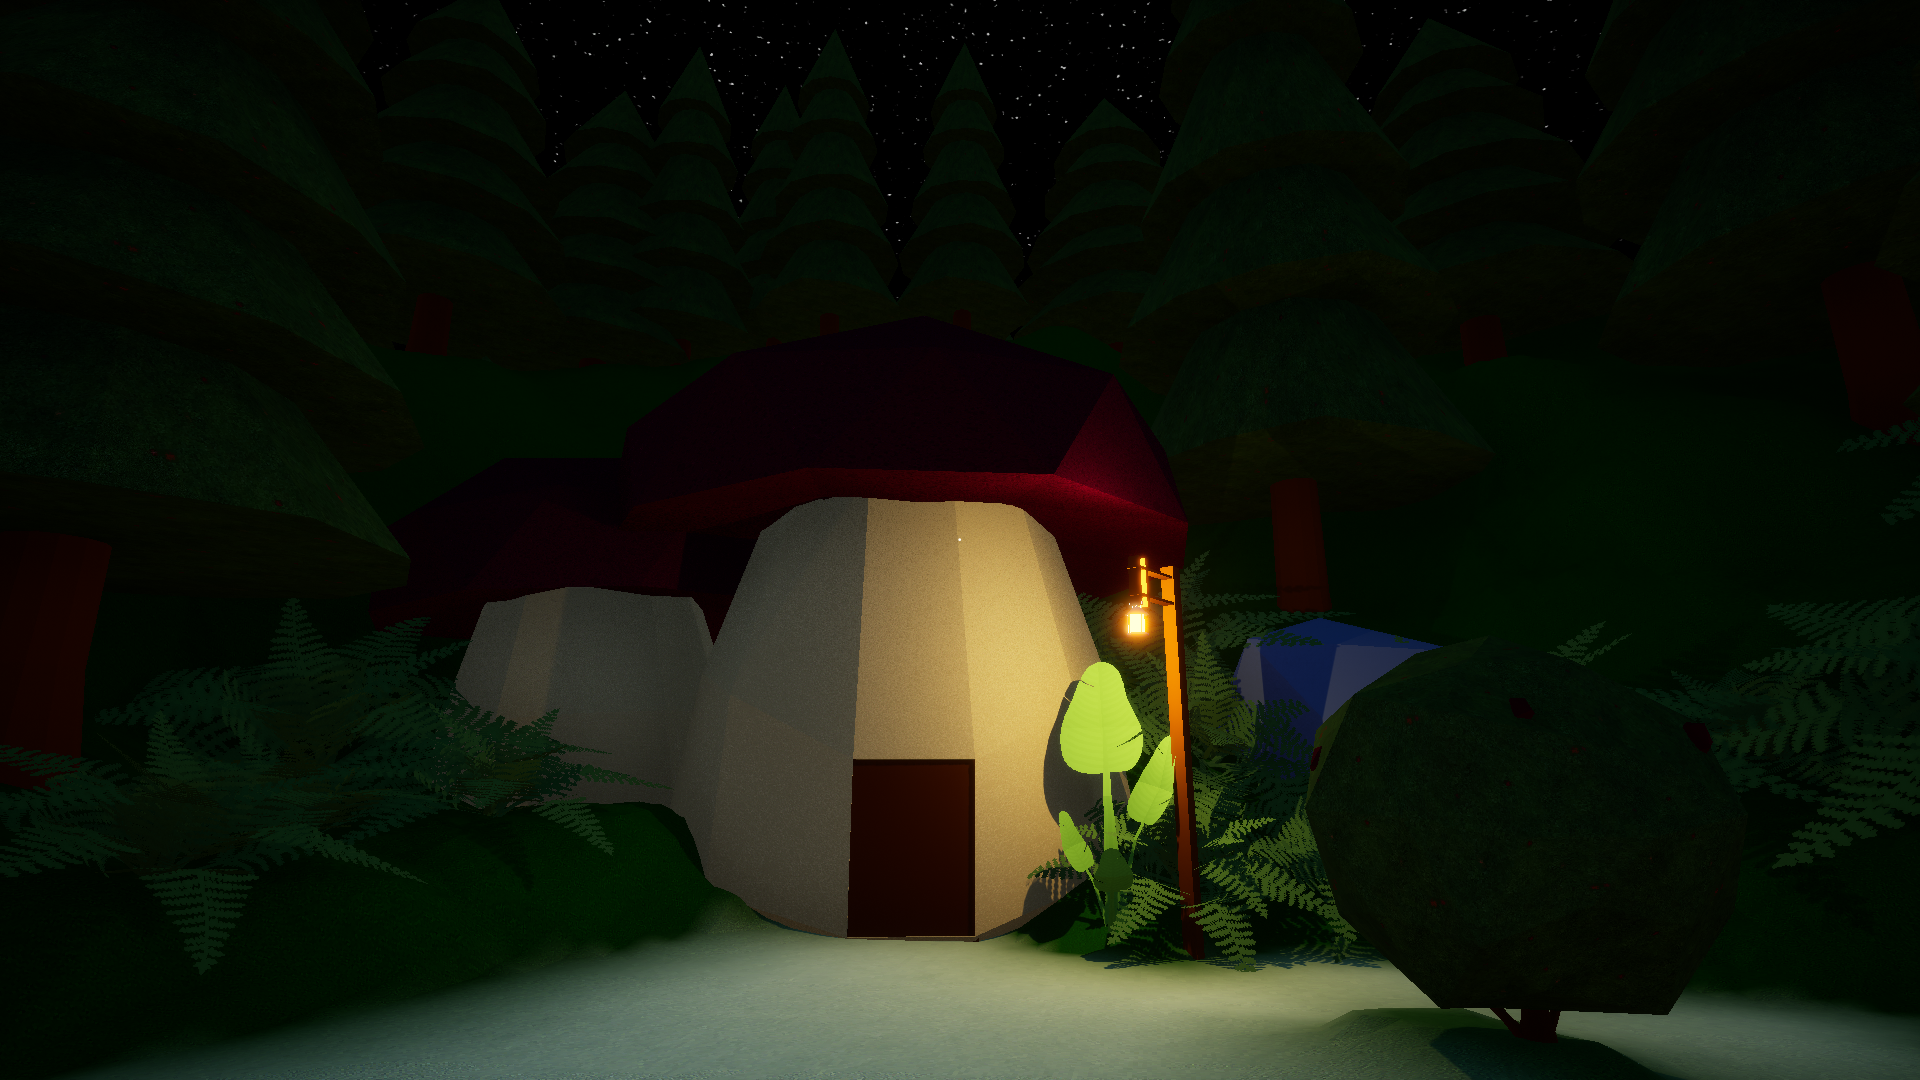 The player's mushroom house at night, lit by a lantern.